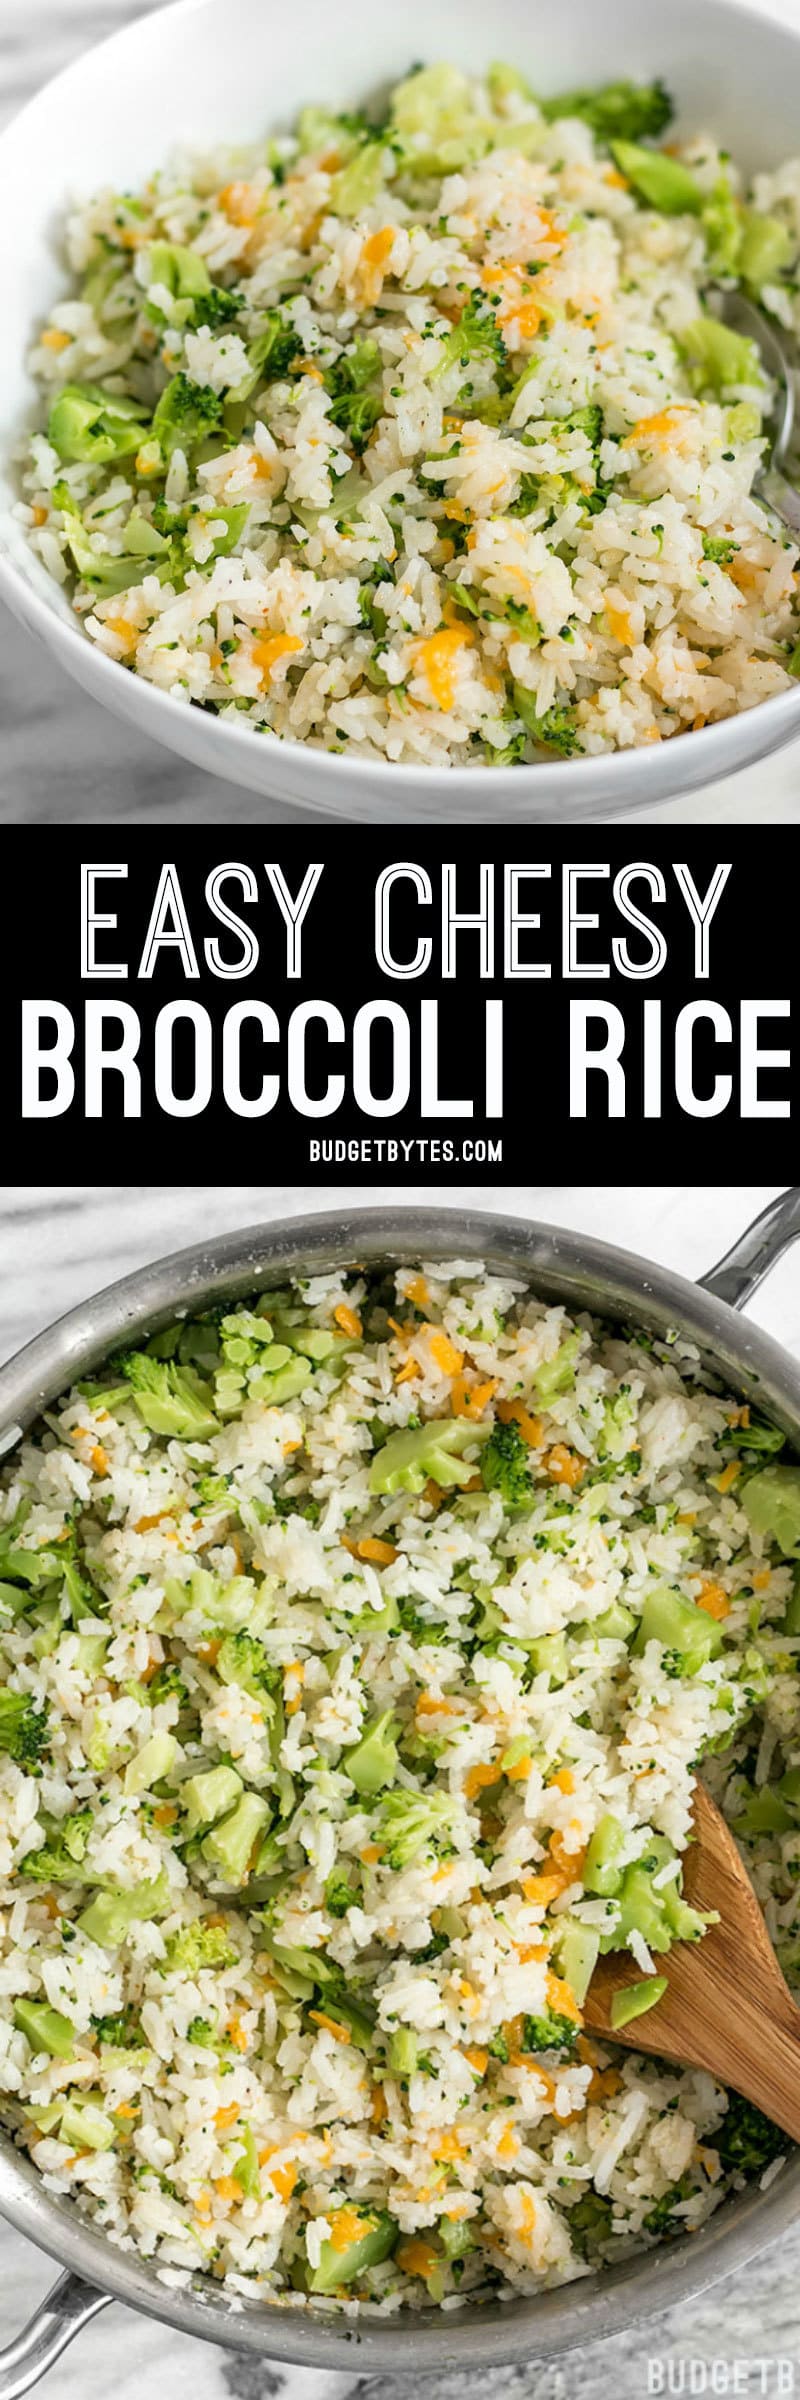 This Easy Cheesy Broccoli Rice is a fast and flavorful side when you don't have time to make a classic Broccoli Cheddar Casserole. BudgetBytes.com